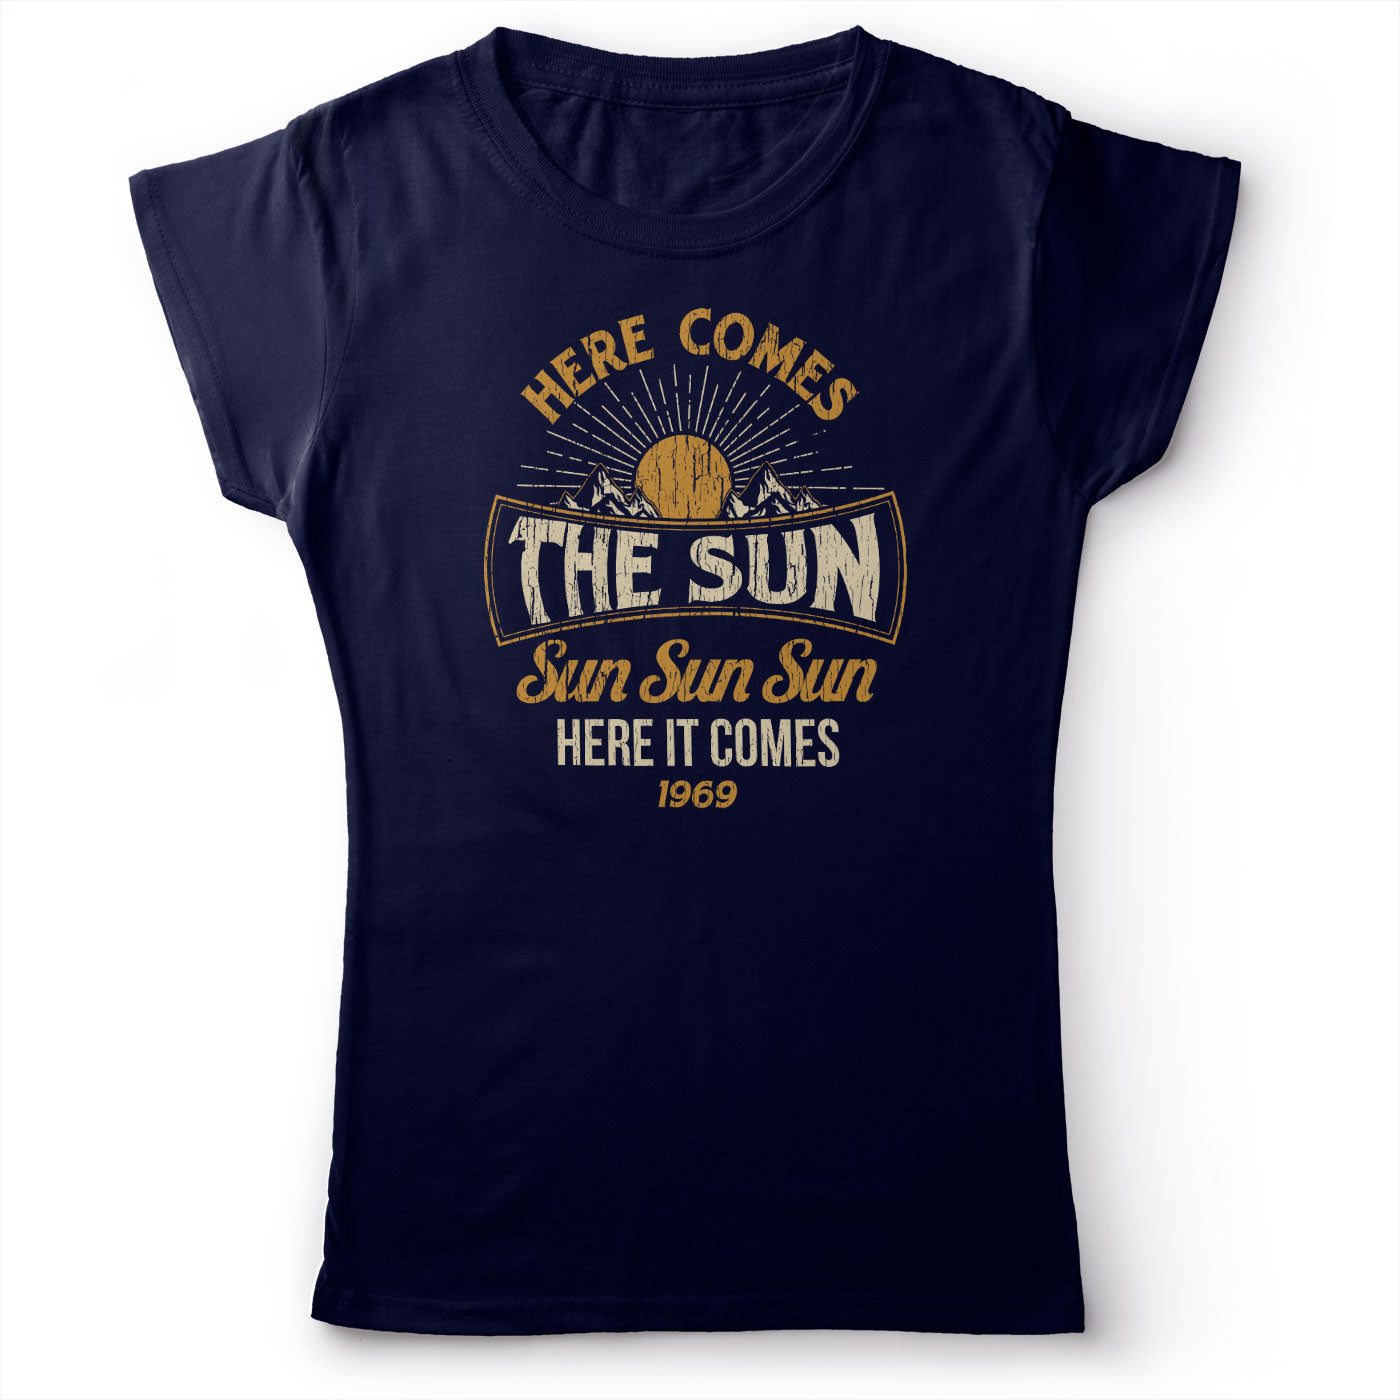 The Beatles - Here Comes The Sun - Women's T-Shirt Navy Blue 2